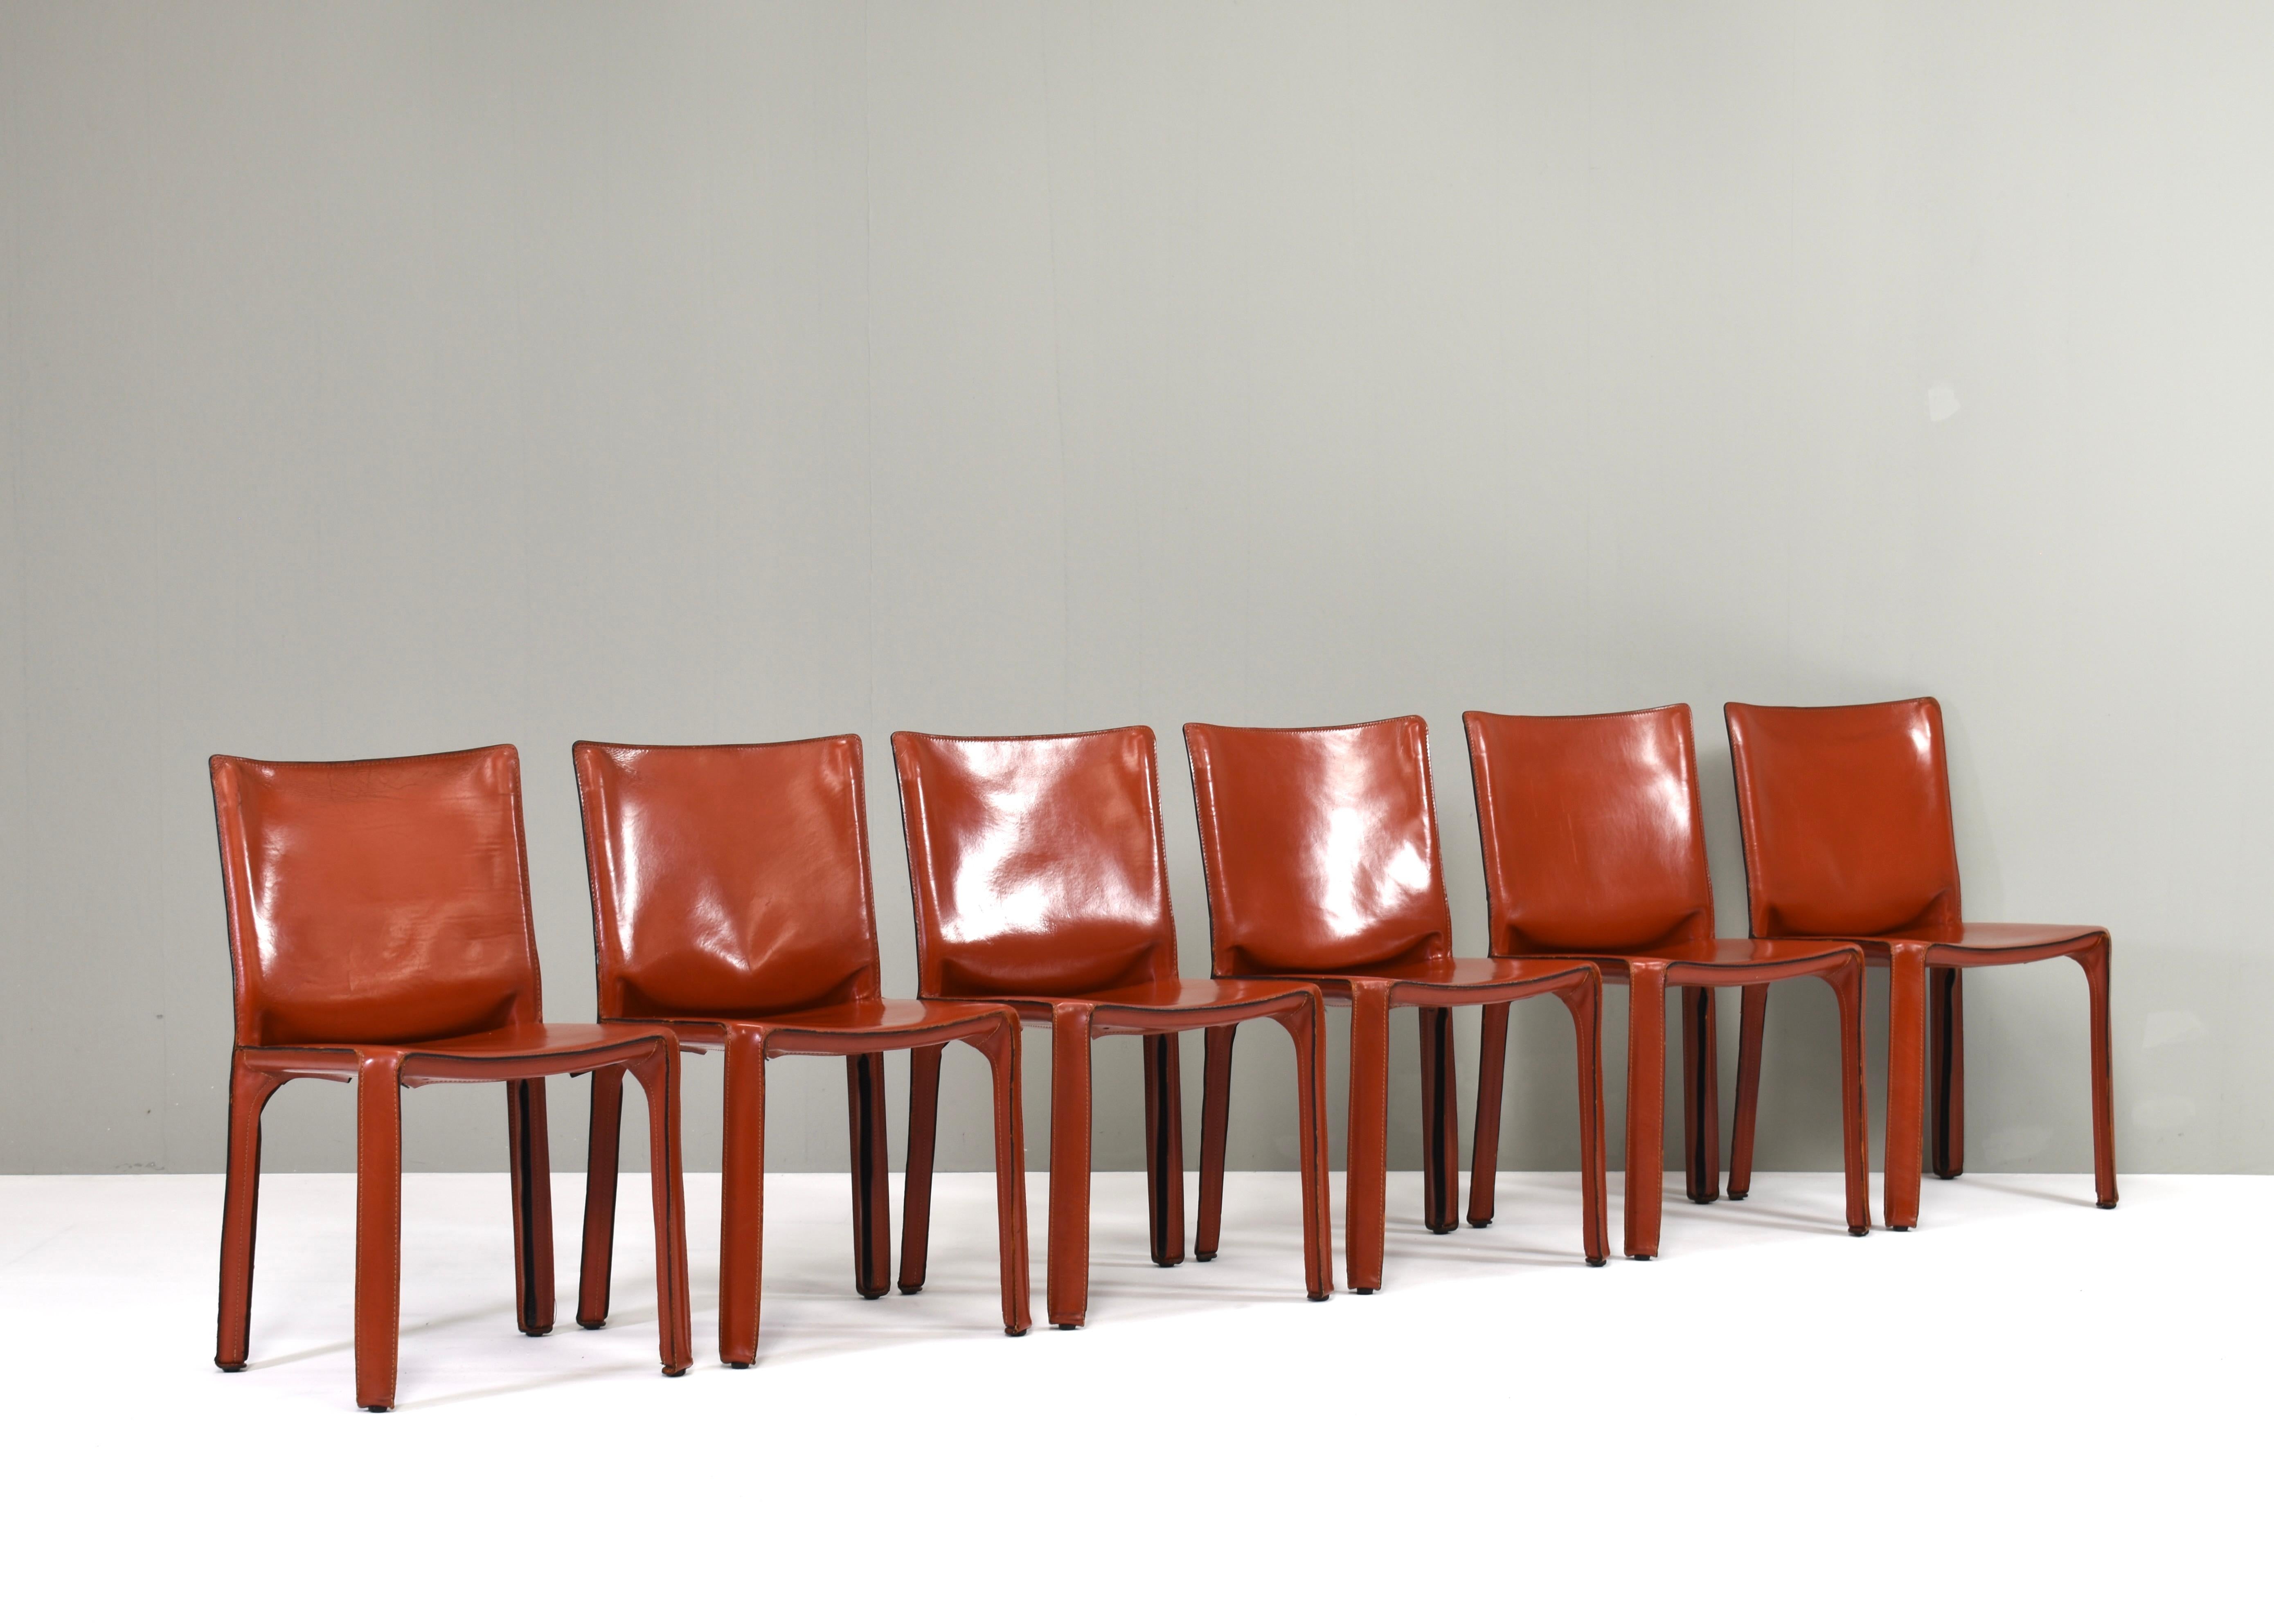 Introducing the Mario Bellini for Cassina CAB 412 Chairs in Luxurious Leather:
Elevate your living space with the epitome of Italian design and craftsmanship - the Mario Bellini Cassina CAB 412 chairs in sumptuous leather. These chairs are not just